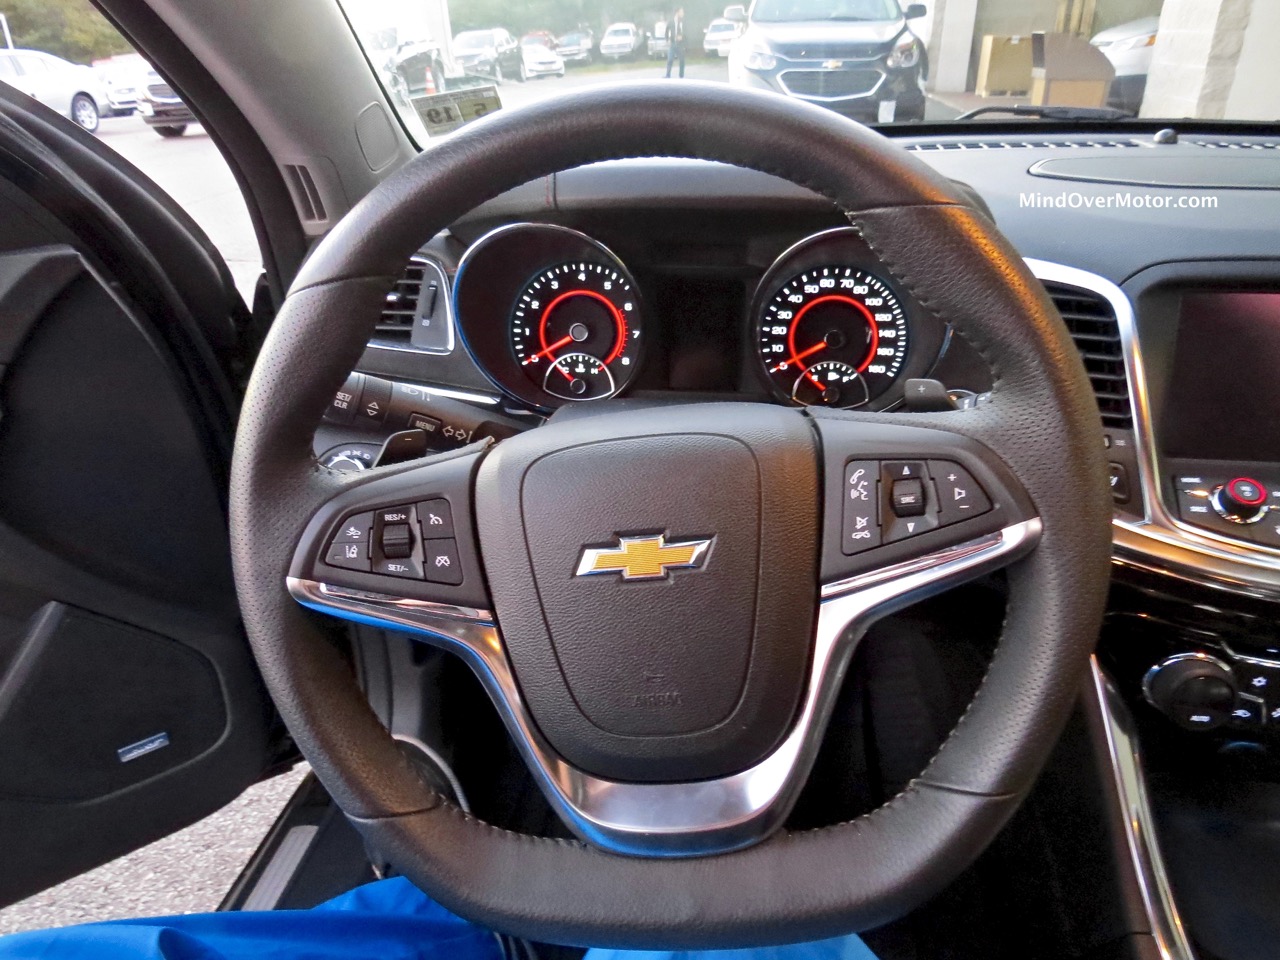 Ford Taurus SHO vs Chevrolet SS, Head To Head | Mind Over Motor